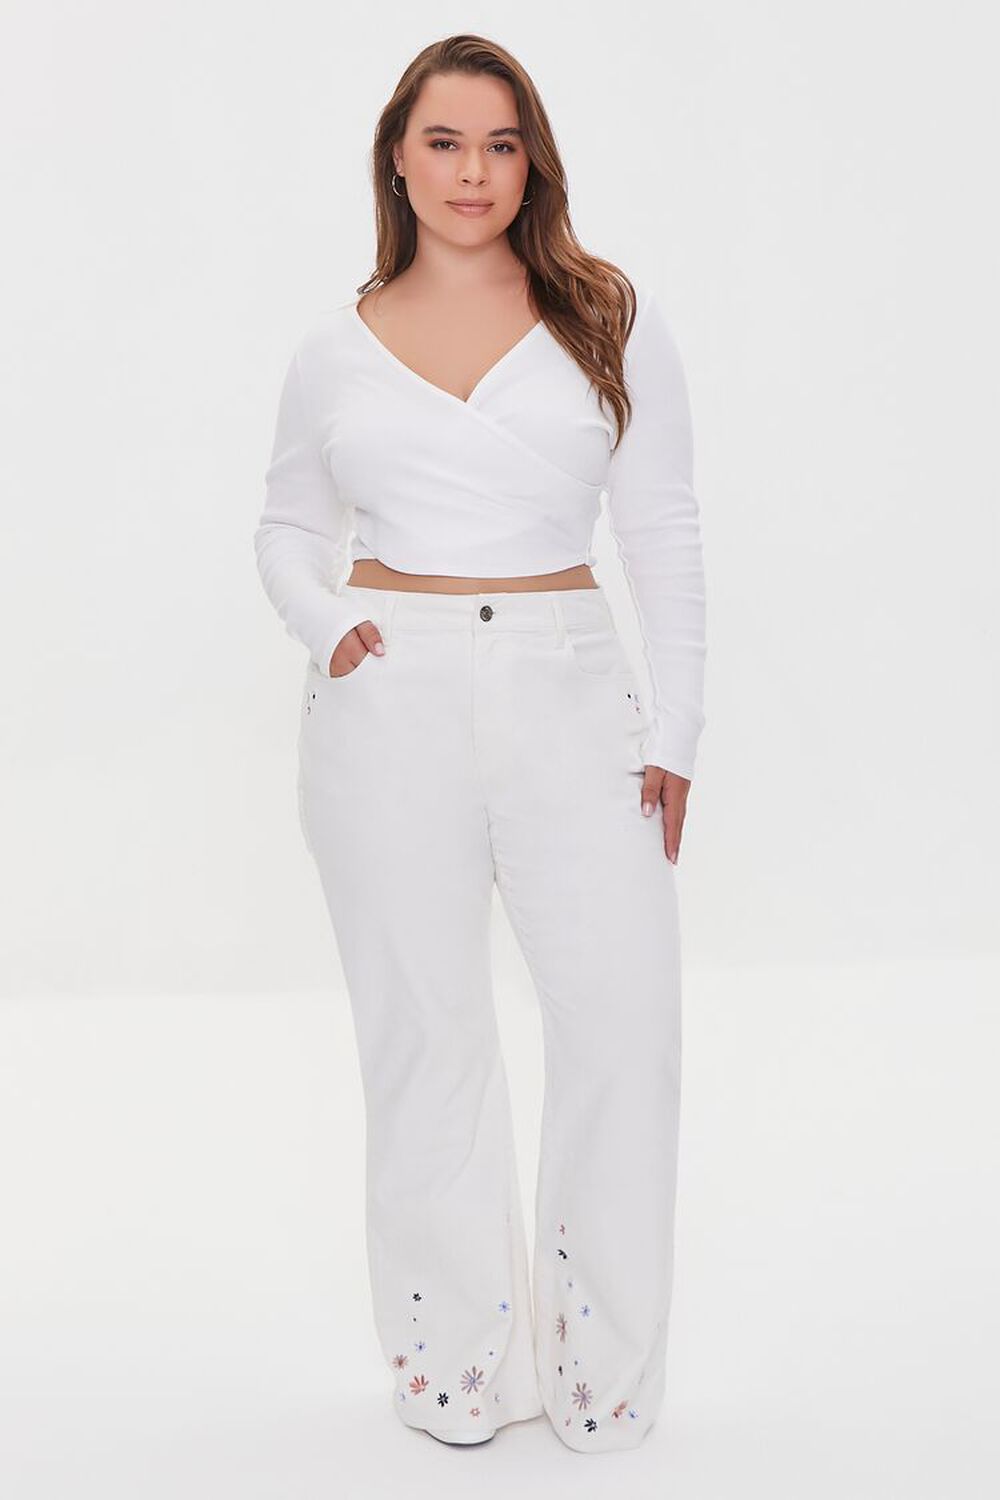 CREAM Plus Size Embroidered Flower Pants, image 1